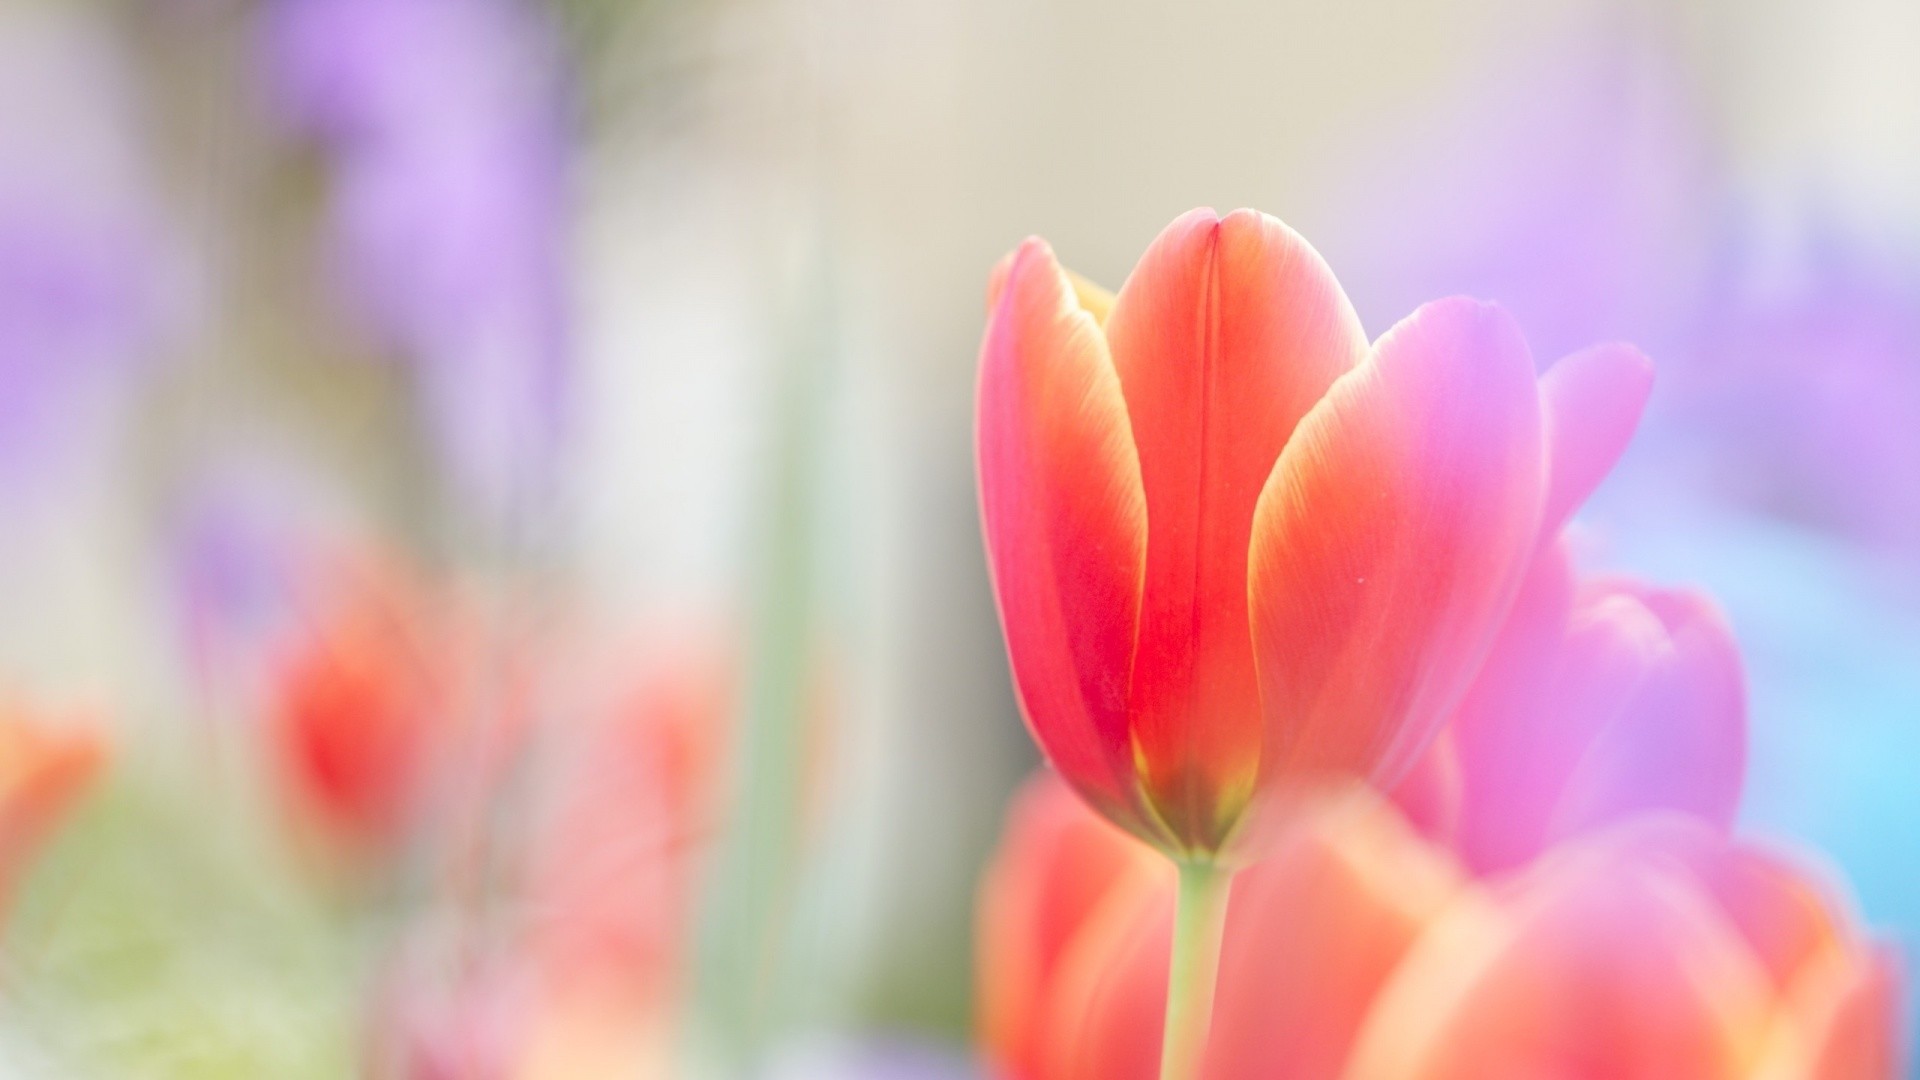 Pink Tulips Wallpaper 68 Images